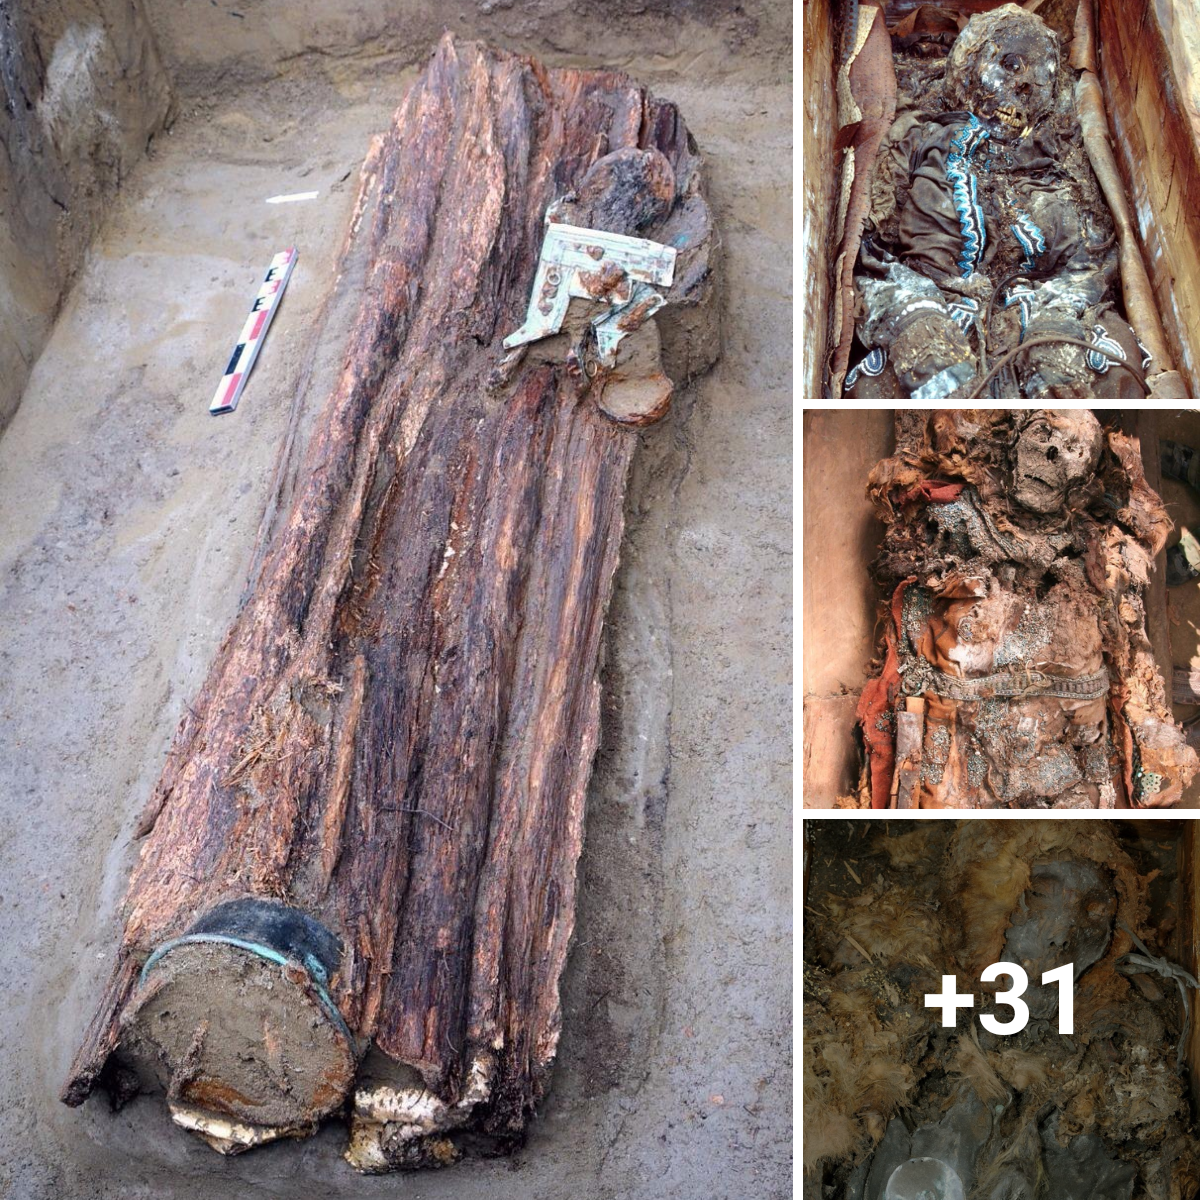 After 2,200 years, the mummy of a shamanic woman was discovered buried within a tree, “wearing fancy clothes and jewelry.”